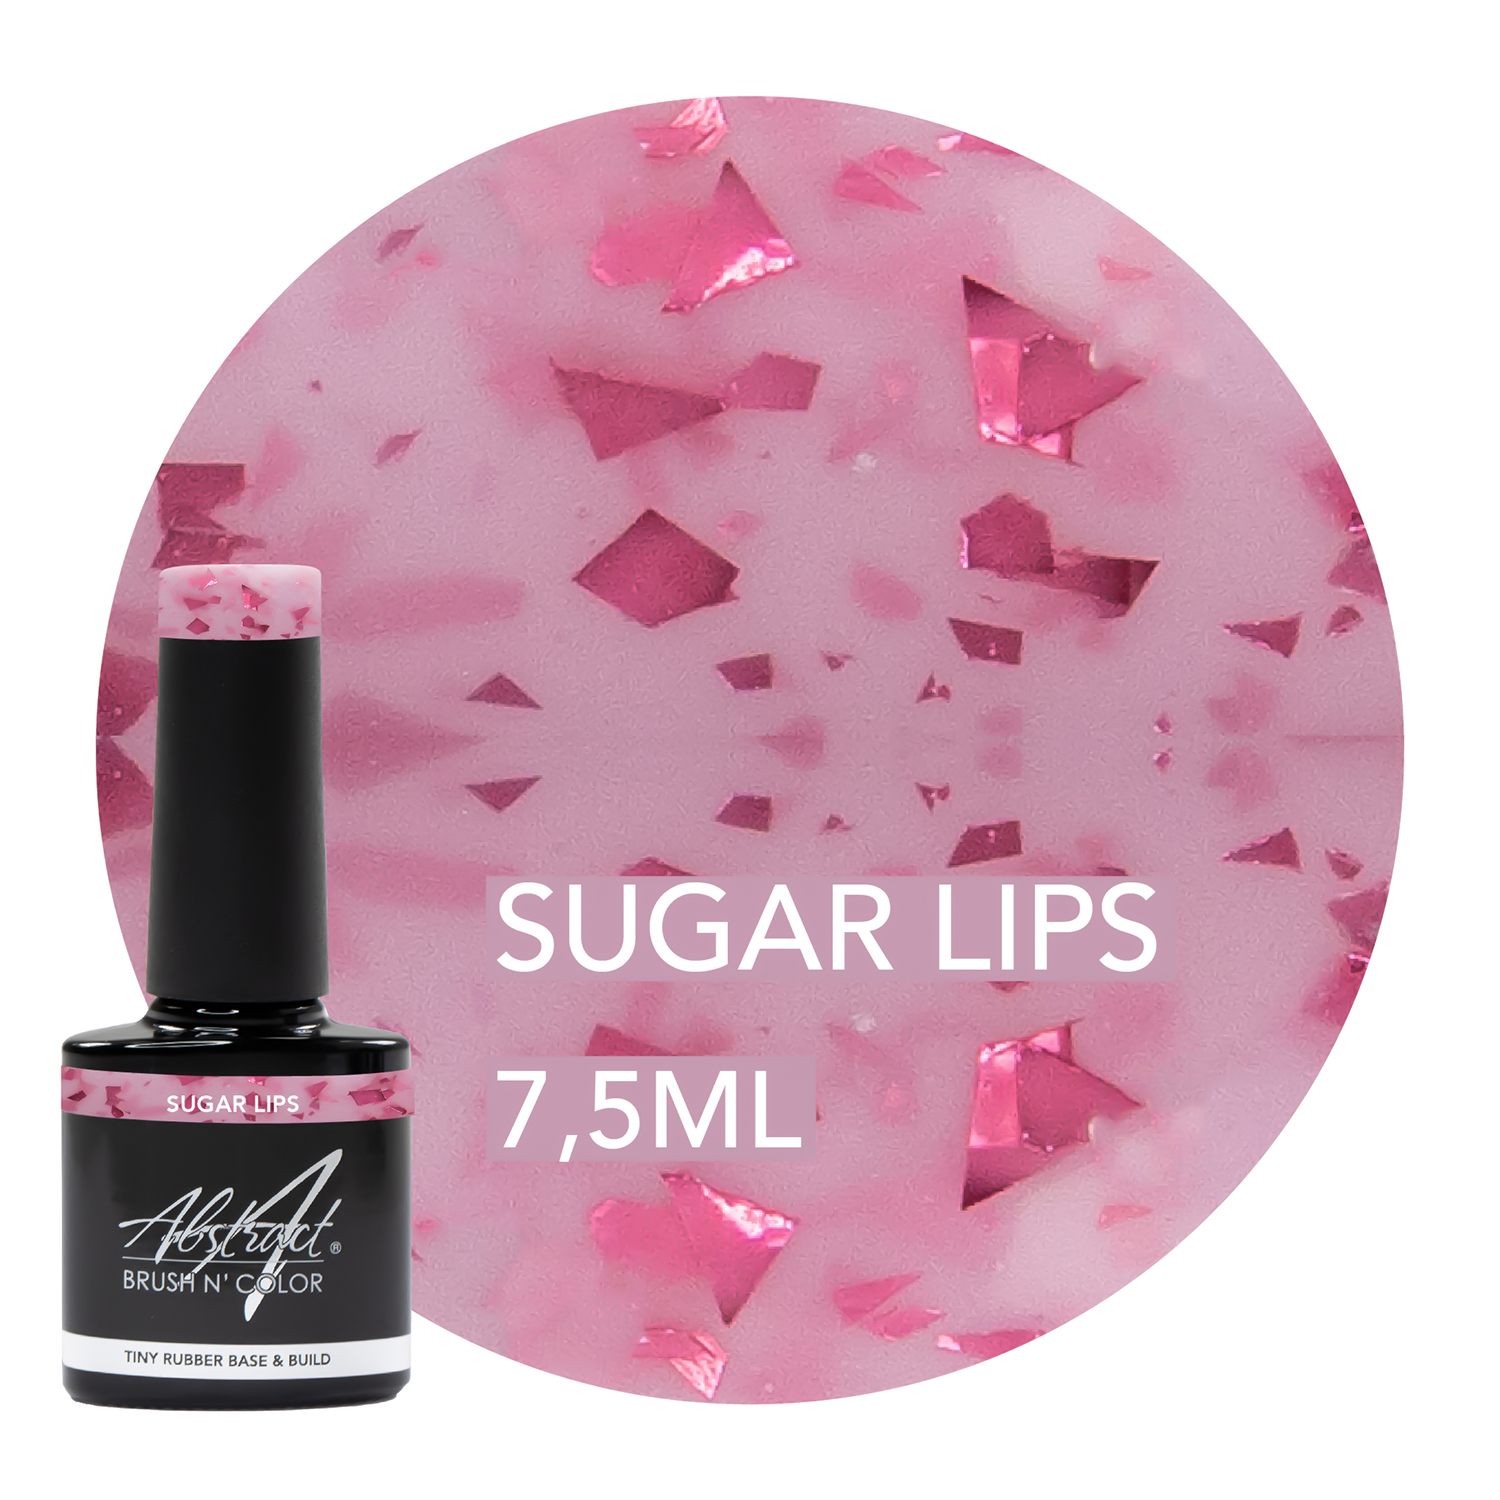 Rubber Base & Build Dazzling Sugar Lips 7,5ml, Abstract | 151010